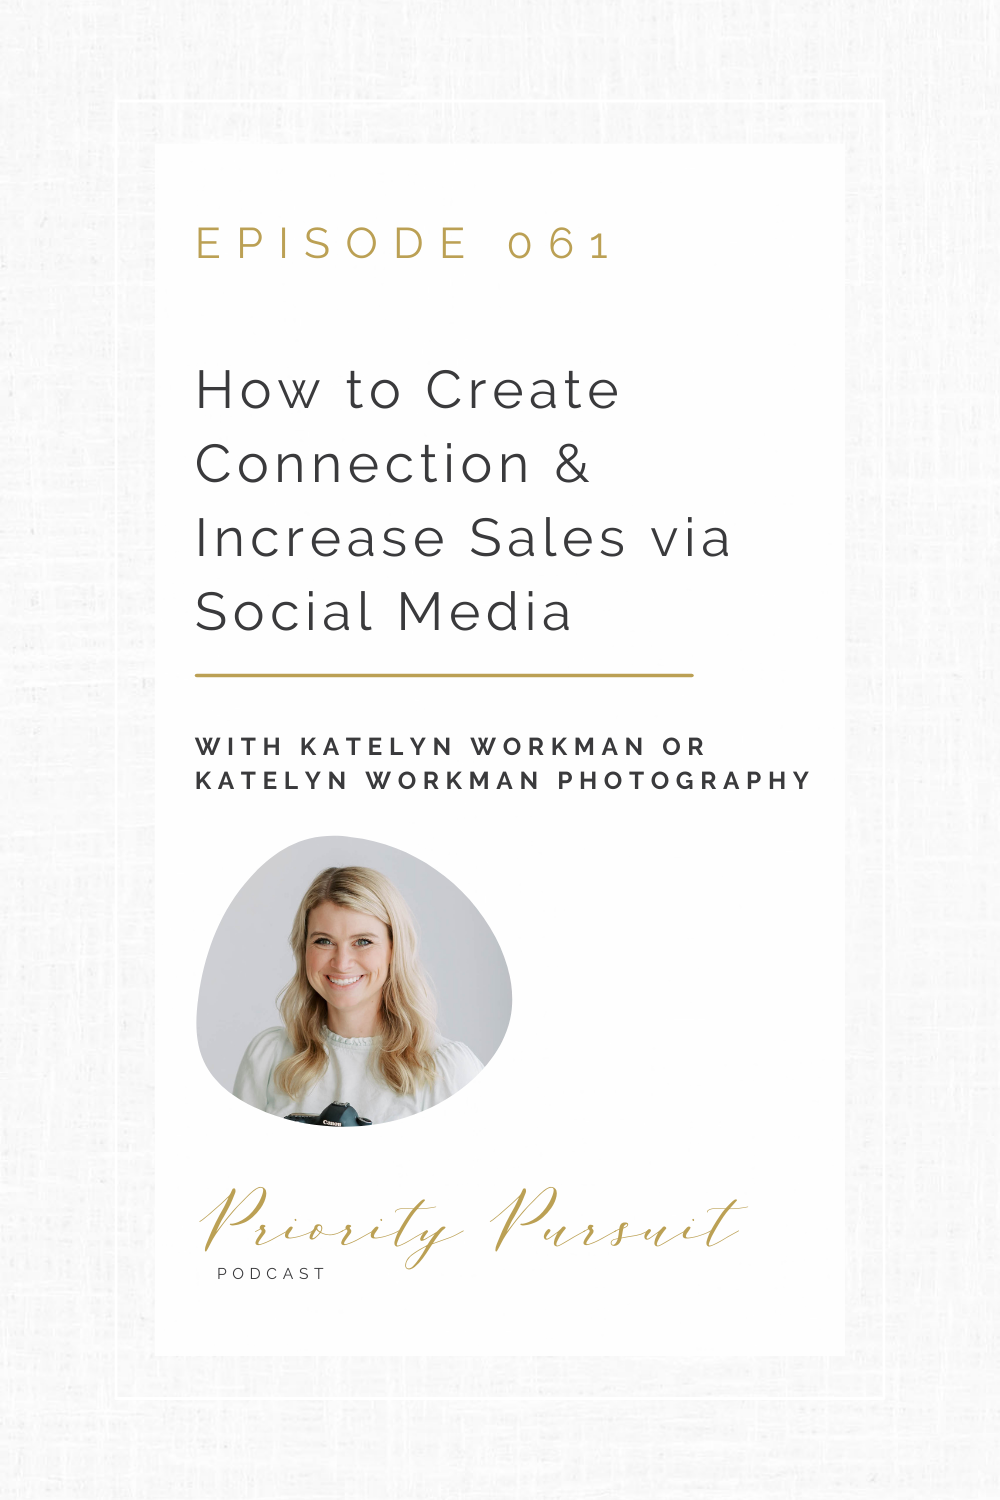 Victoria Rayburn and Katelyn Workman discuss how to create connection and increase sales via social media.